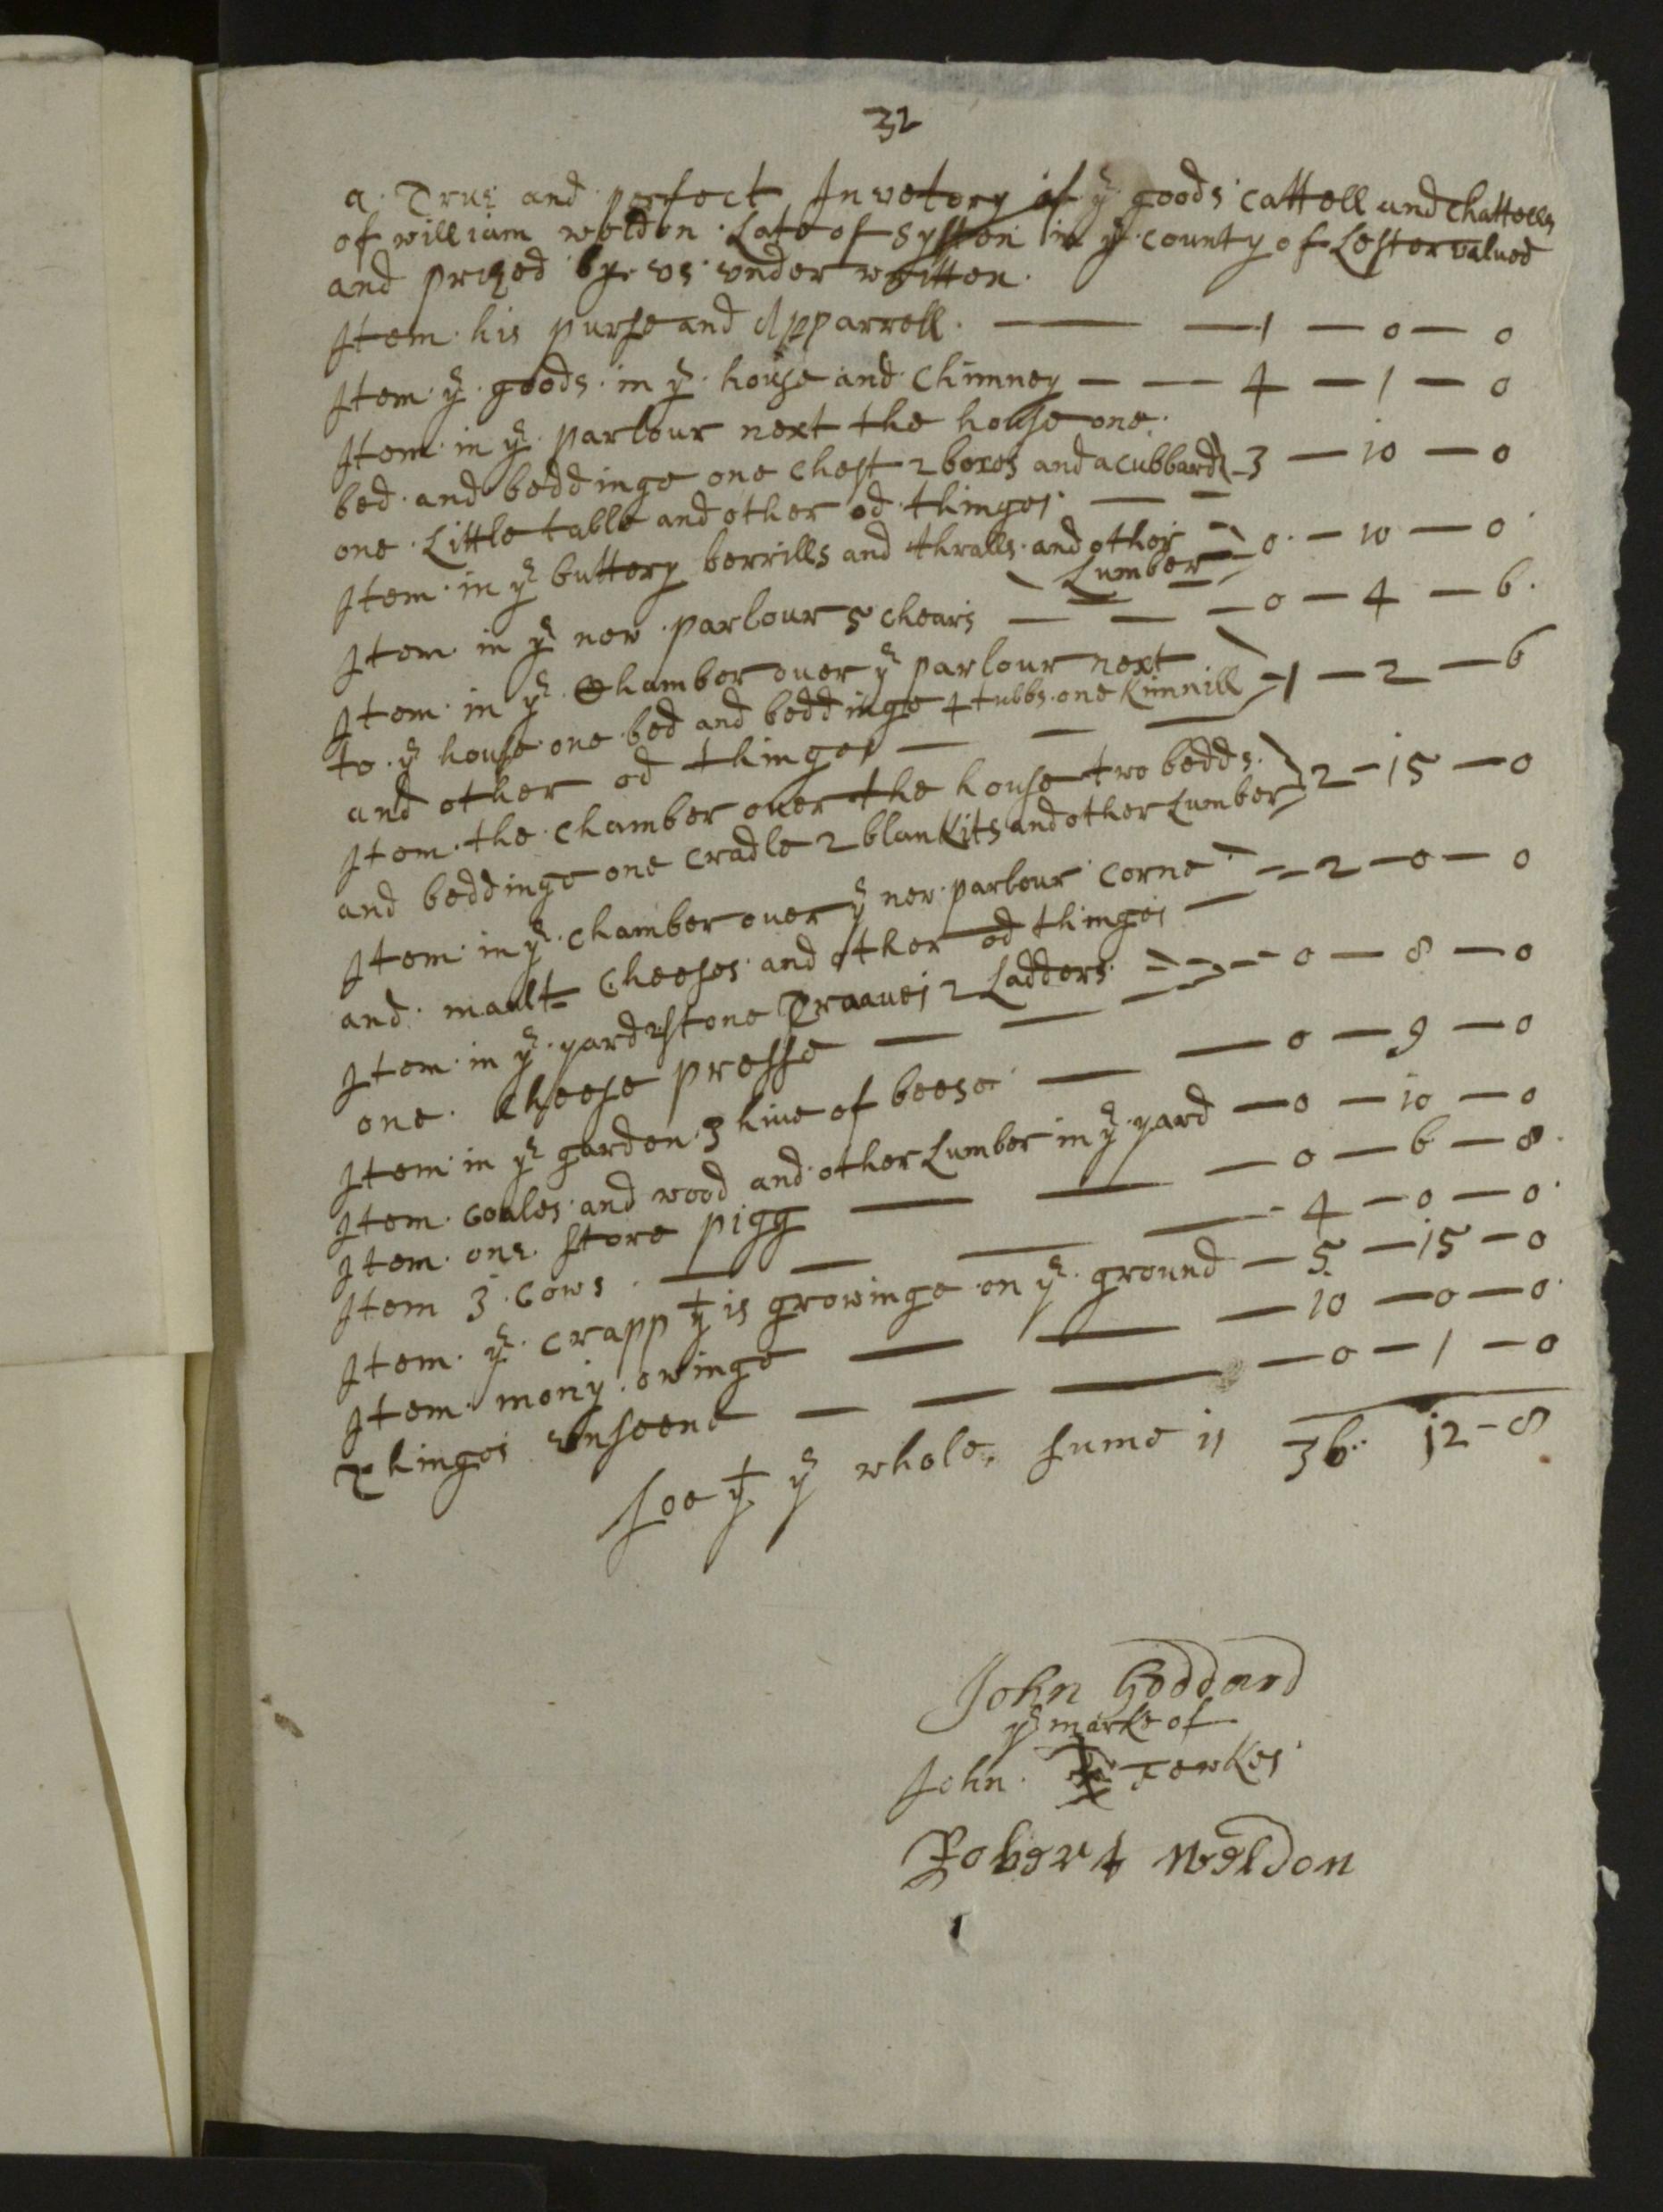 The inventory of William's possessions in 1708